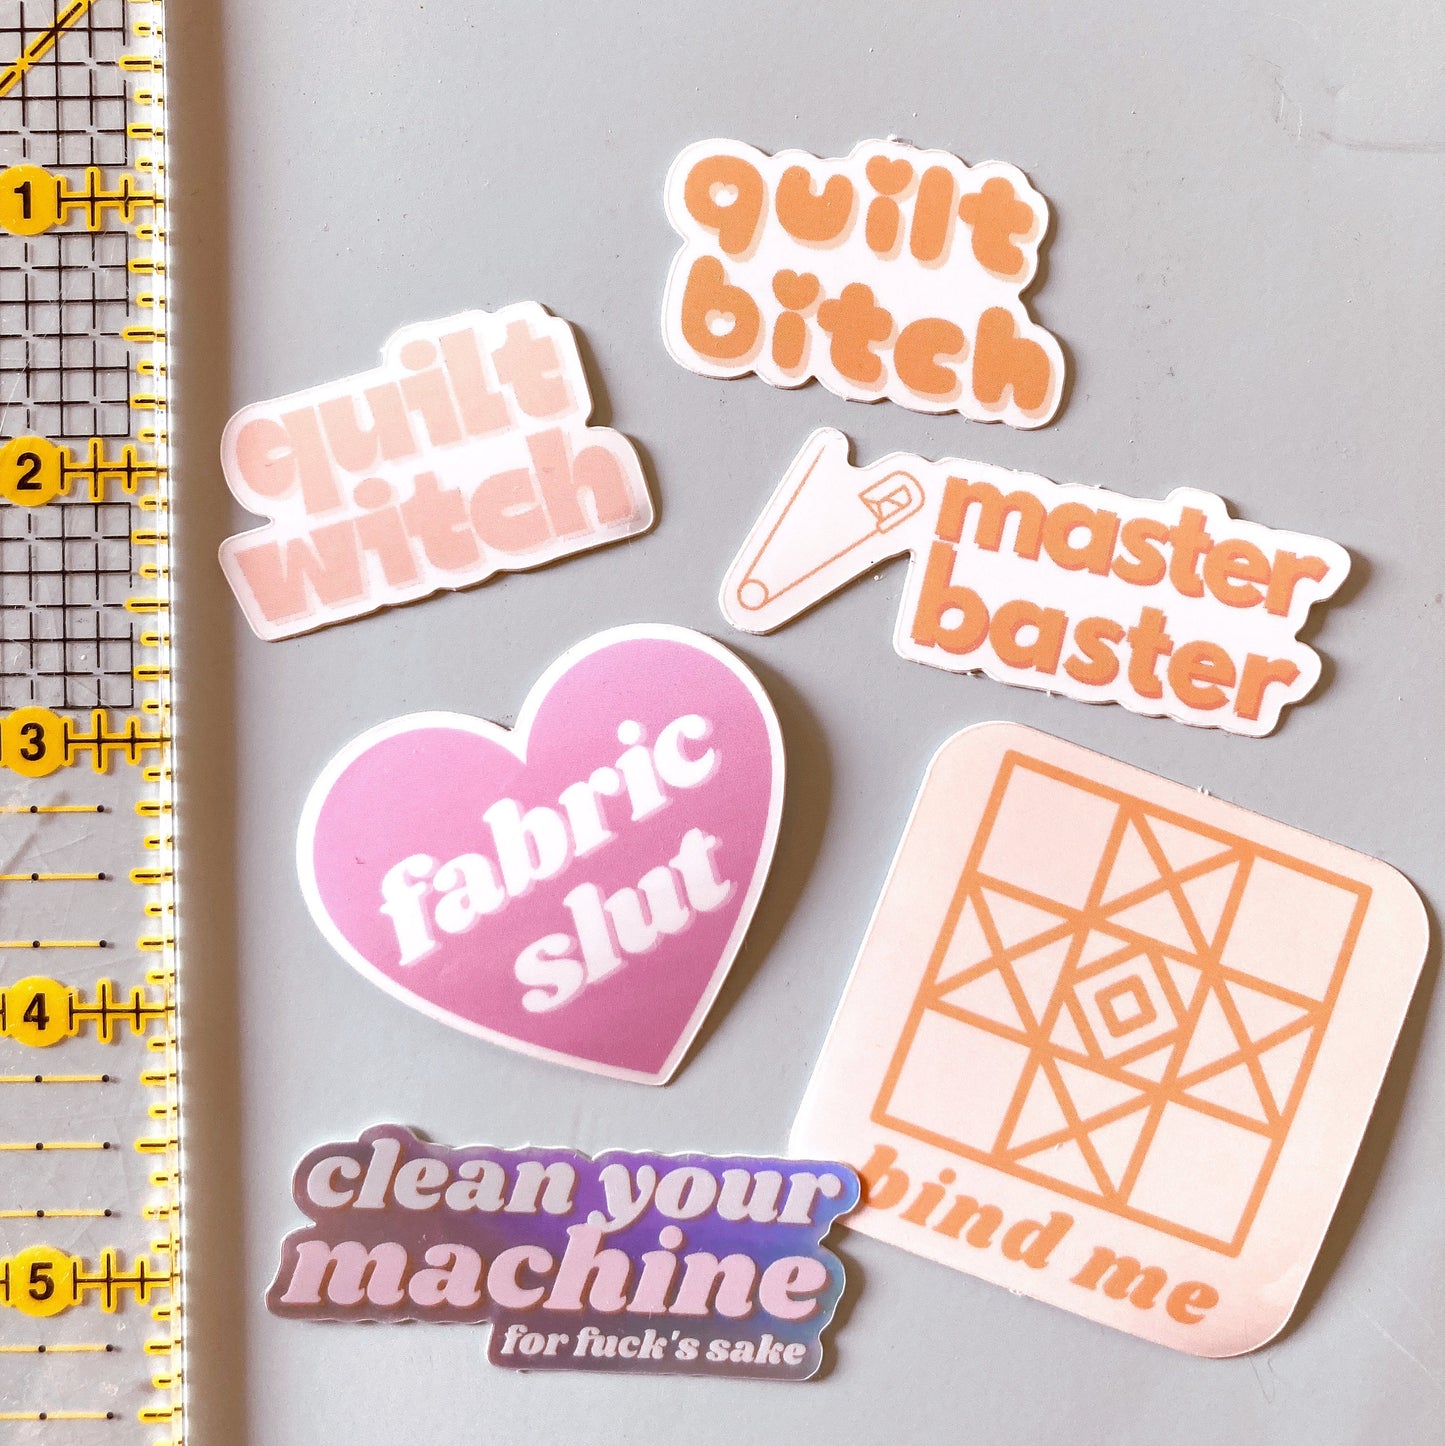 Quilting sewing vinyl sticker pack